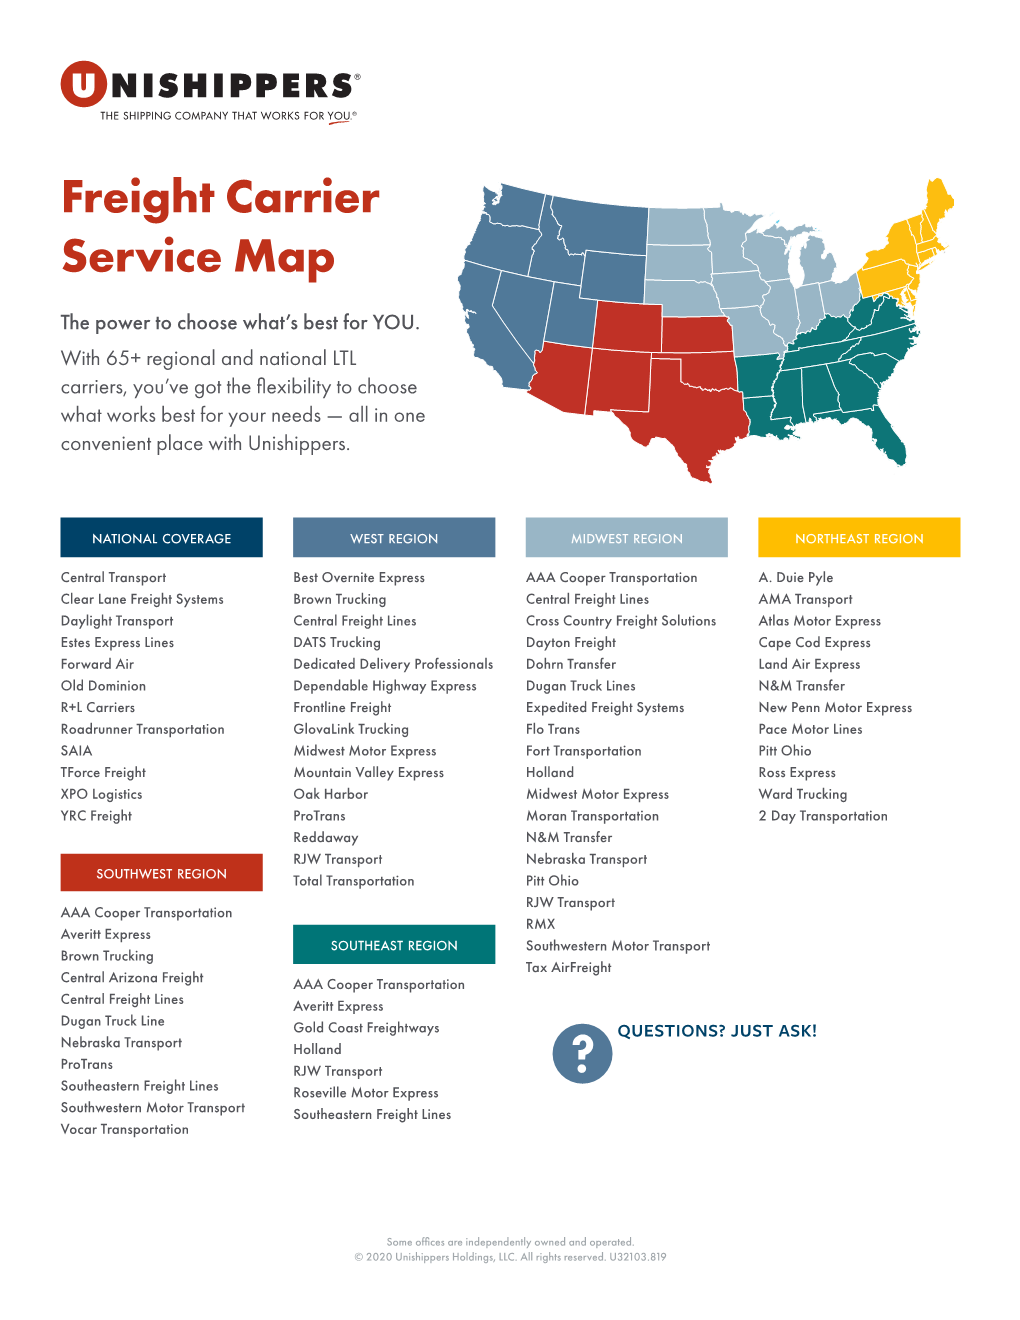 Freight Carrier Service Map